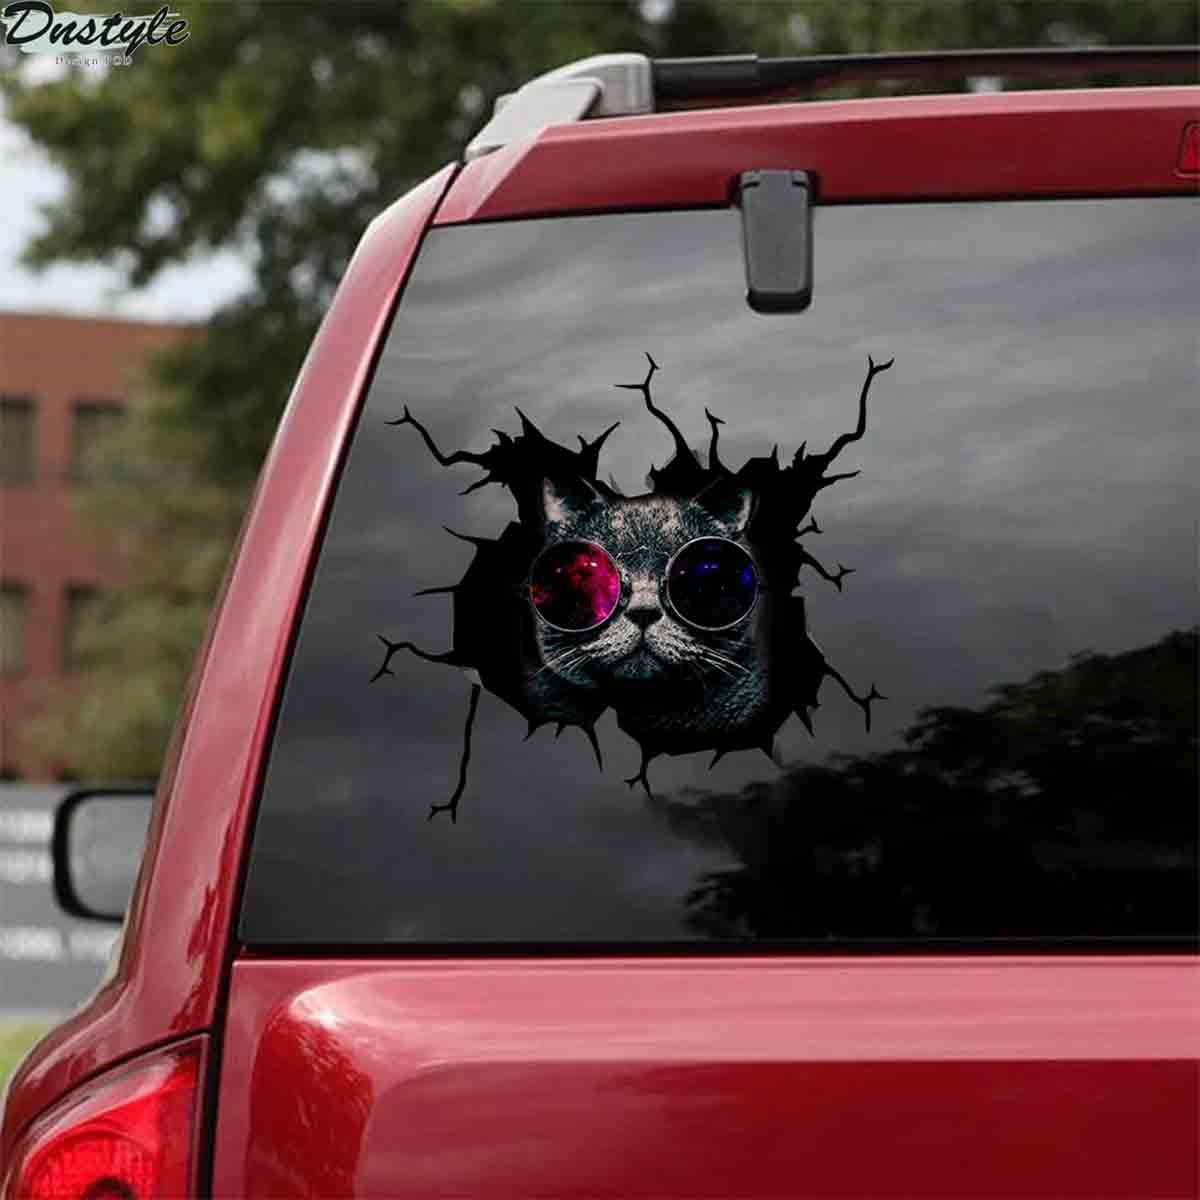 Black cats with glasses car decal sticker 1